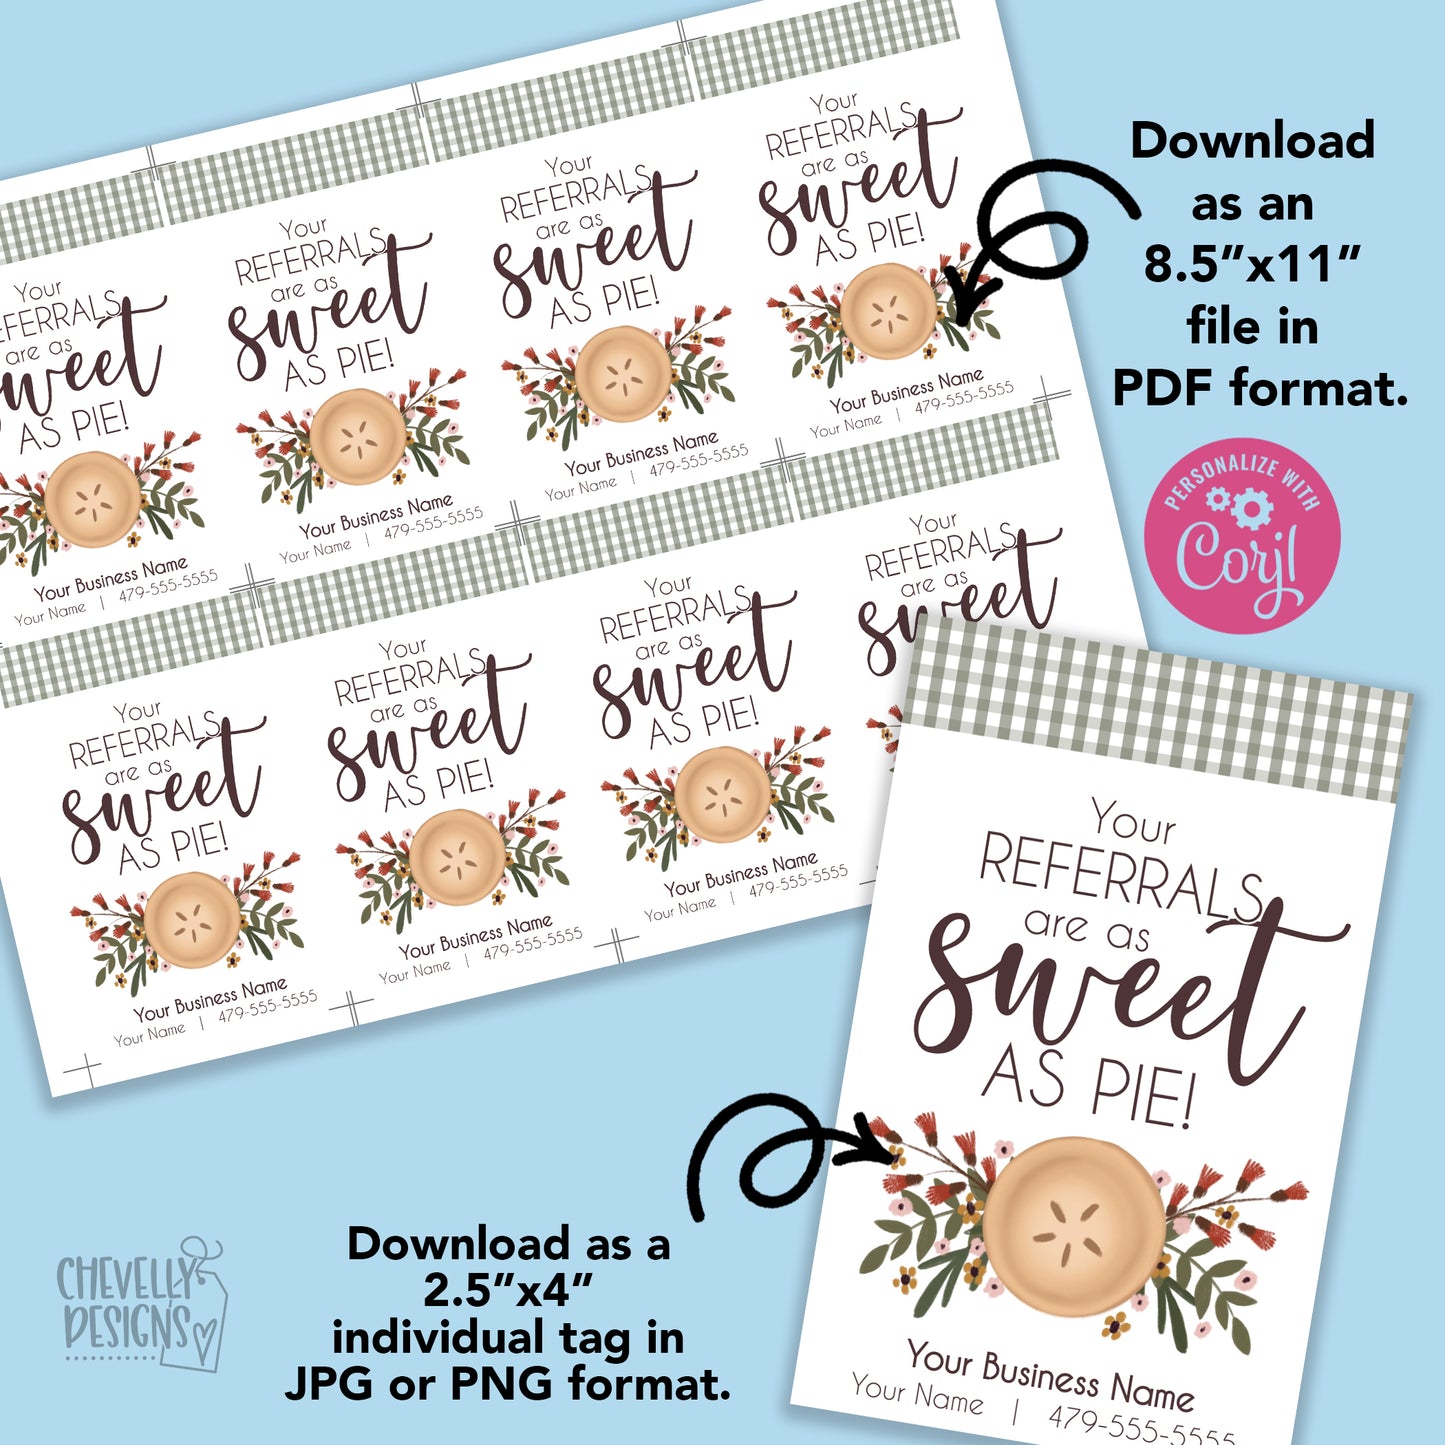 EDITABLE - Your Referrals are as Sweet as Pie - Business Gift Tags - Printable Digital File